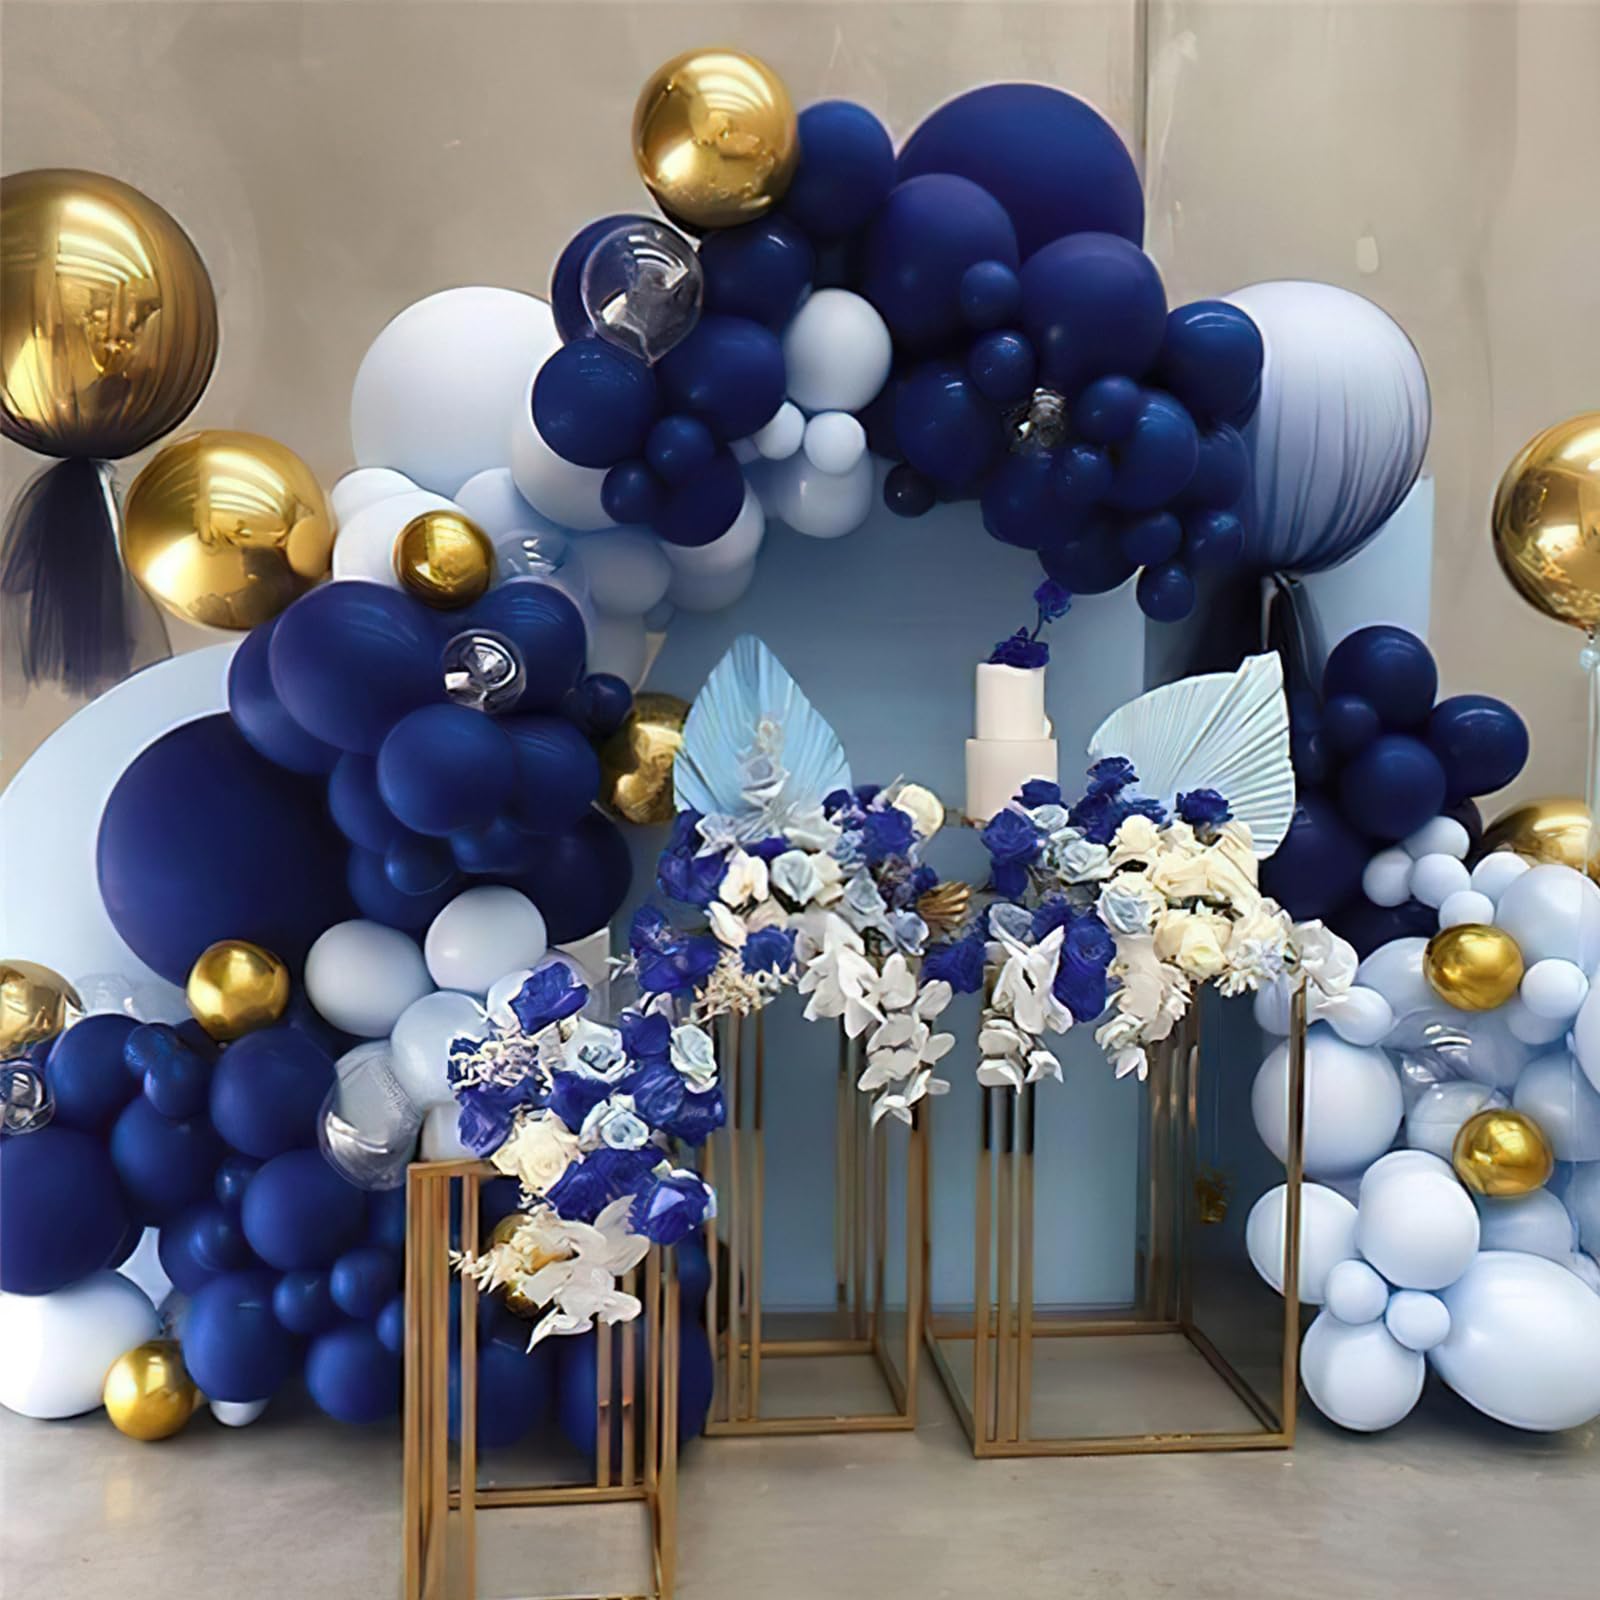 PartyWoo Navy Blue Balloons, 80 pcs Pearl Navy Blue Balloons Different Sizes Pack of 5 Inch and 12 Inch Navy Balloons for Balloon Garland or Arch as Party Decorations, Birthday Decorations, Blue-Z90